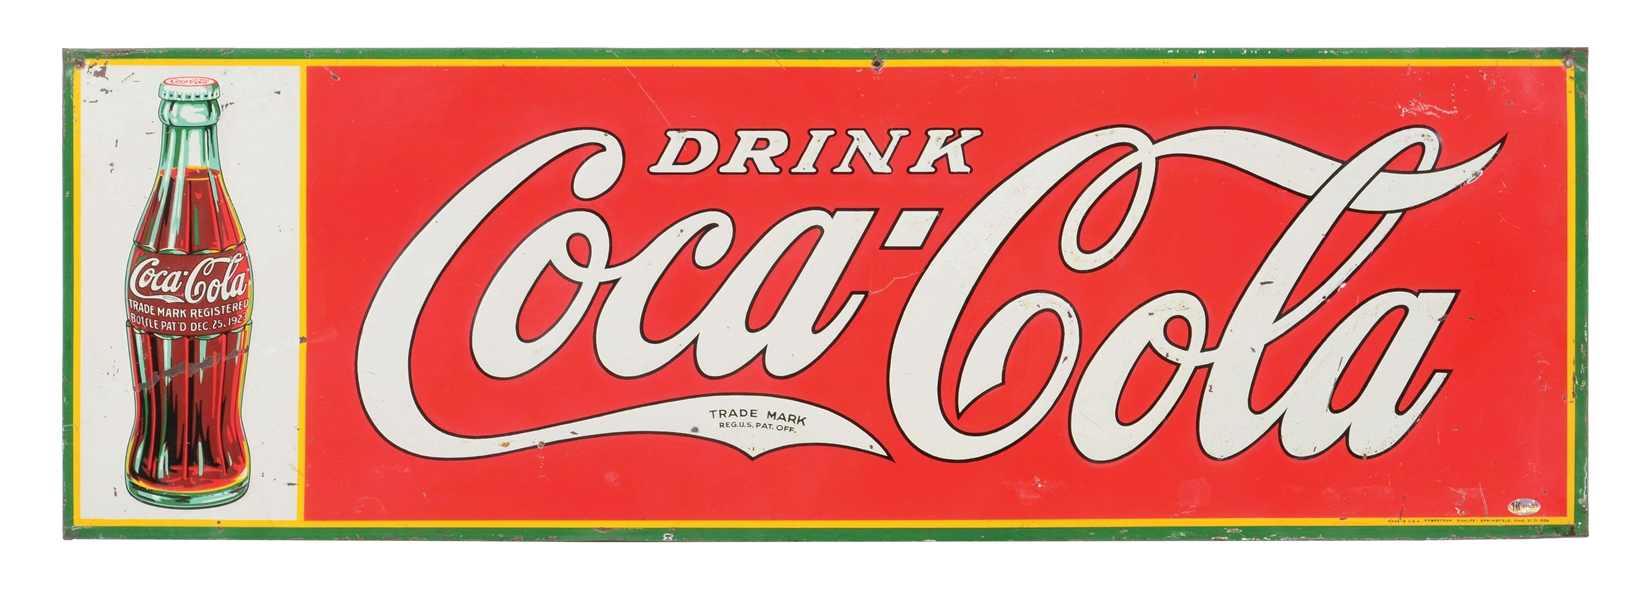 DRINK COCA COLA EMBOSSED TIN SIGN W/ CHRISTMAS BOTTLE GRAPHIC. 